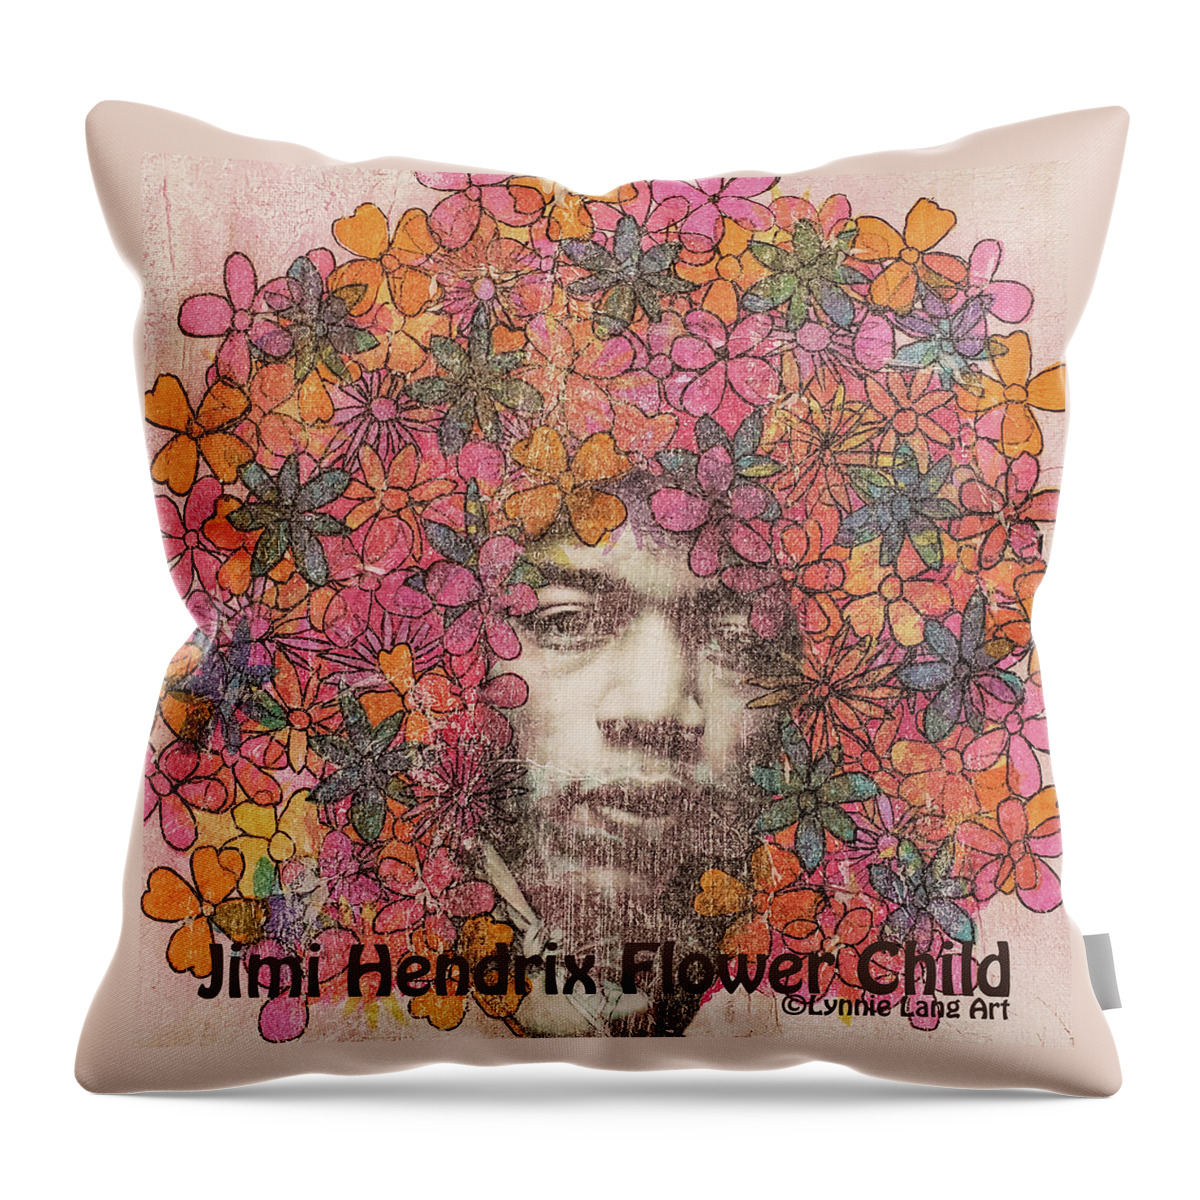 Jimi Throw Pillow featuring the painting Jimi Hendrix by Lynnie Lang